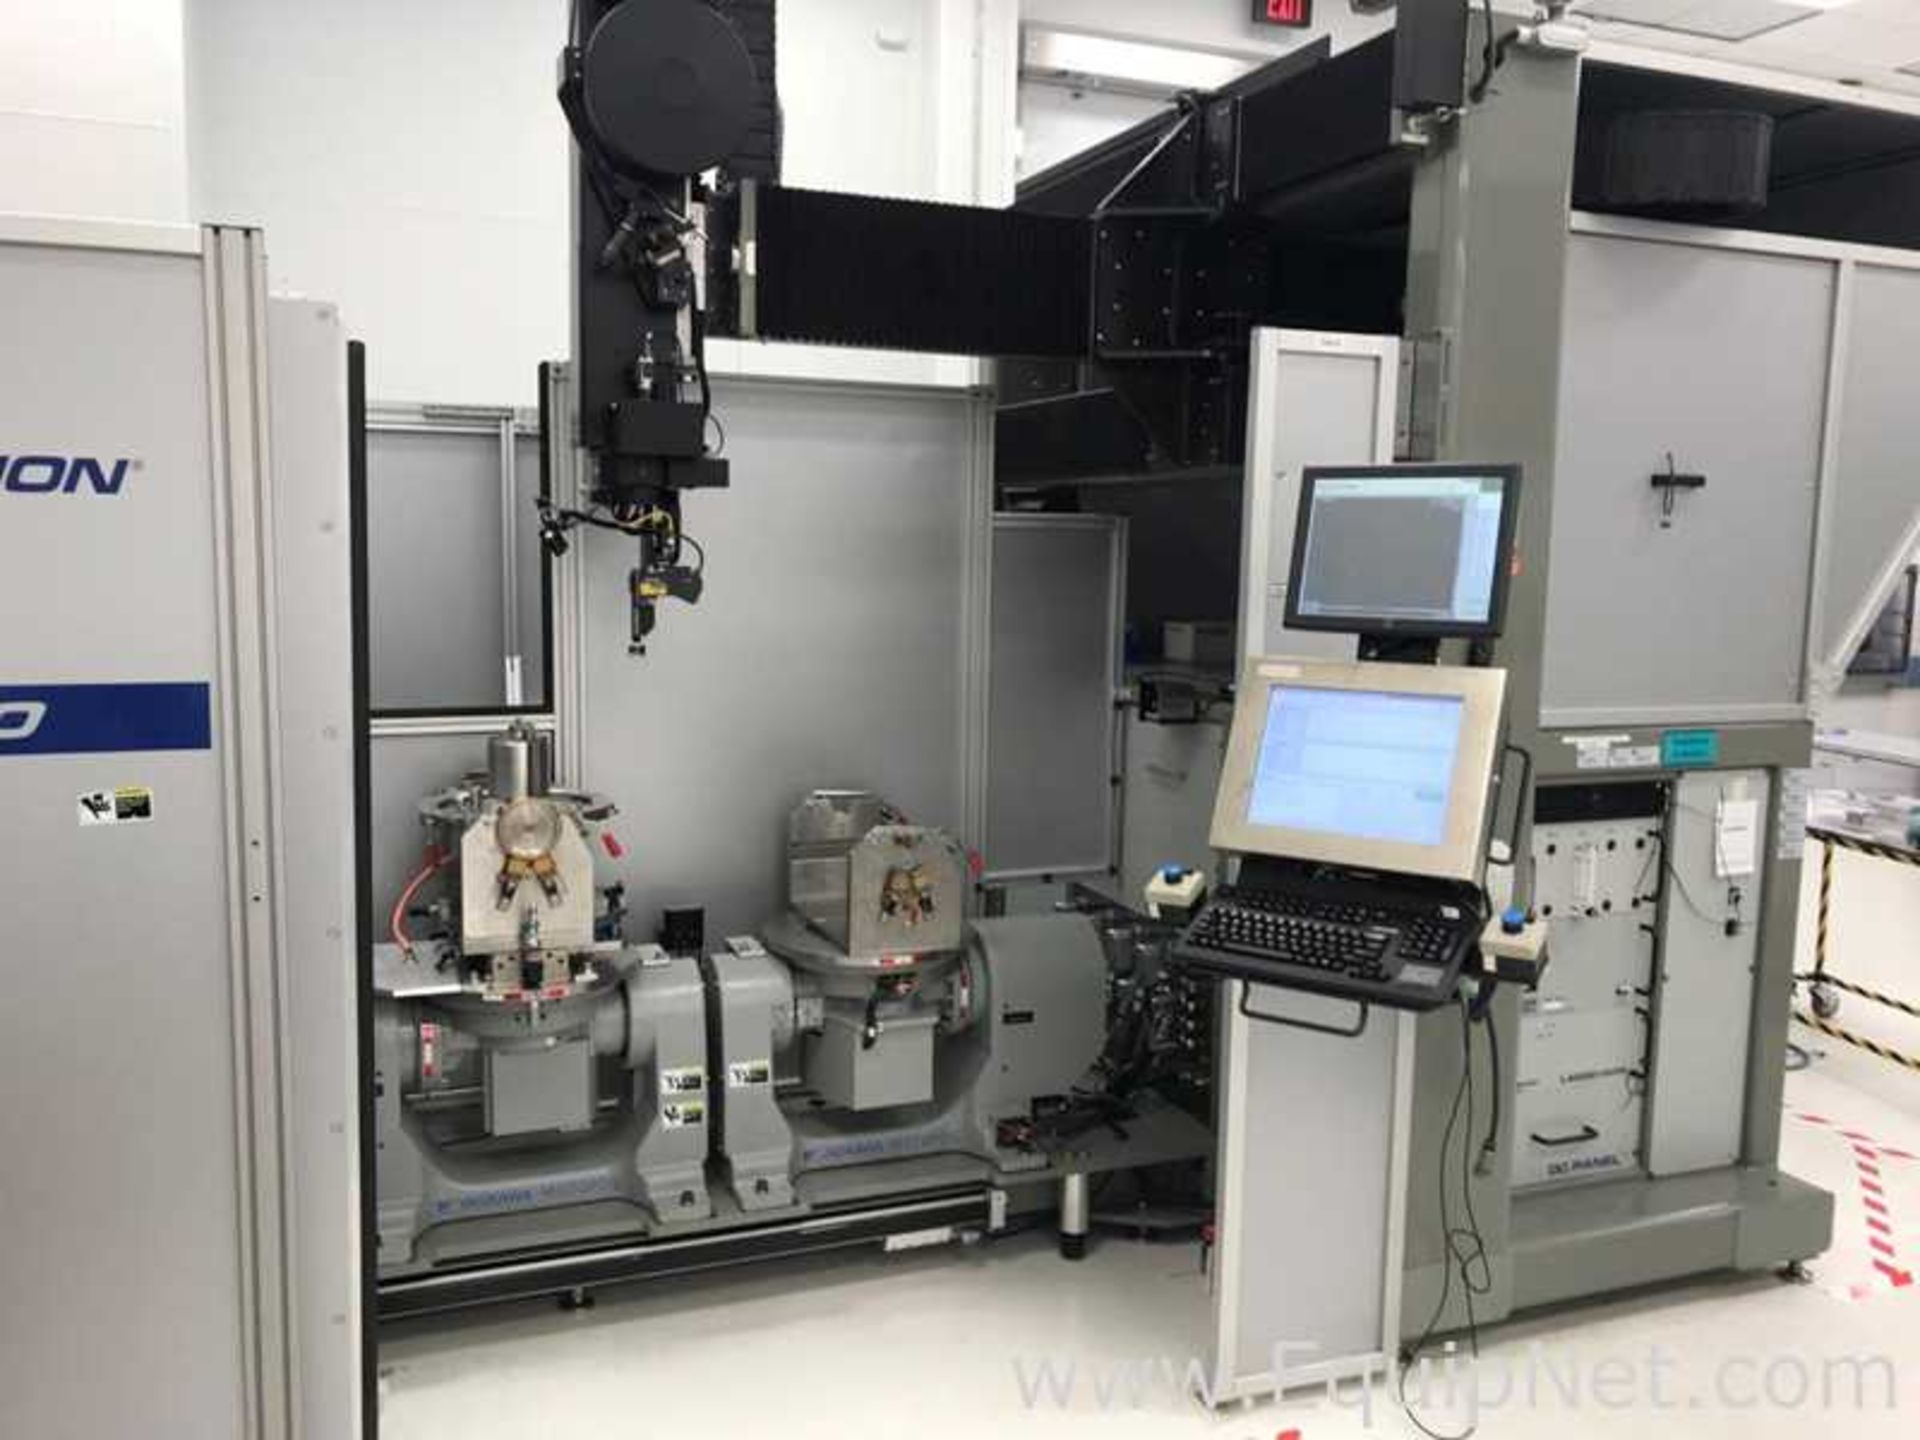 Liburdi Automation Laws 5000 Multi Axis Tig Welding Cell with 4 Yaskawa Robotic Positioners